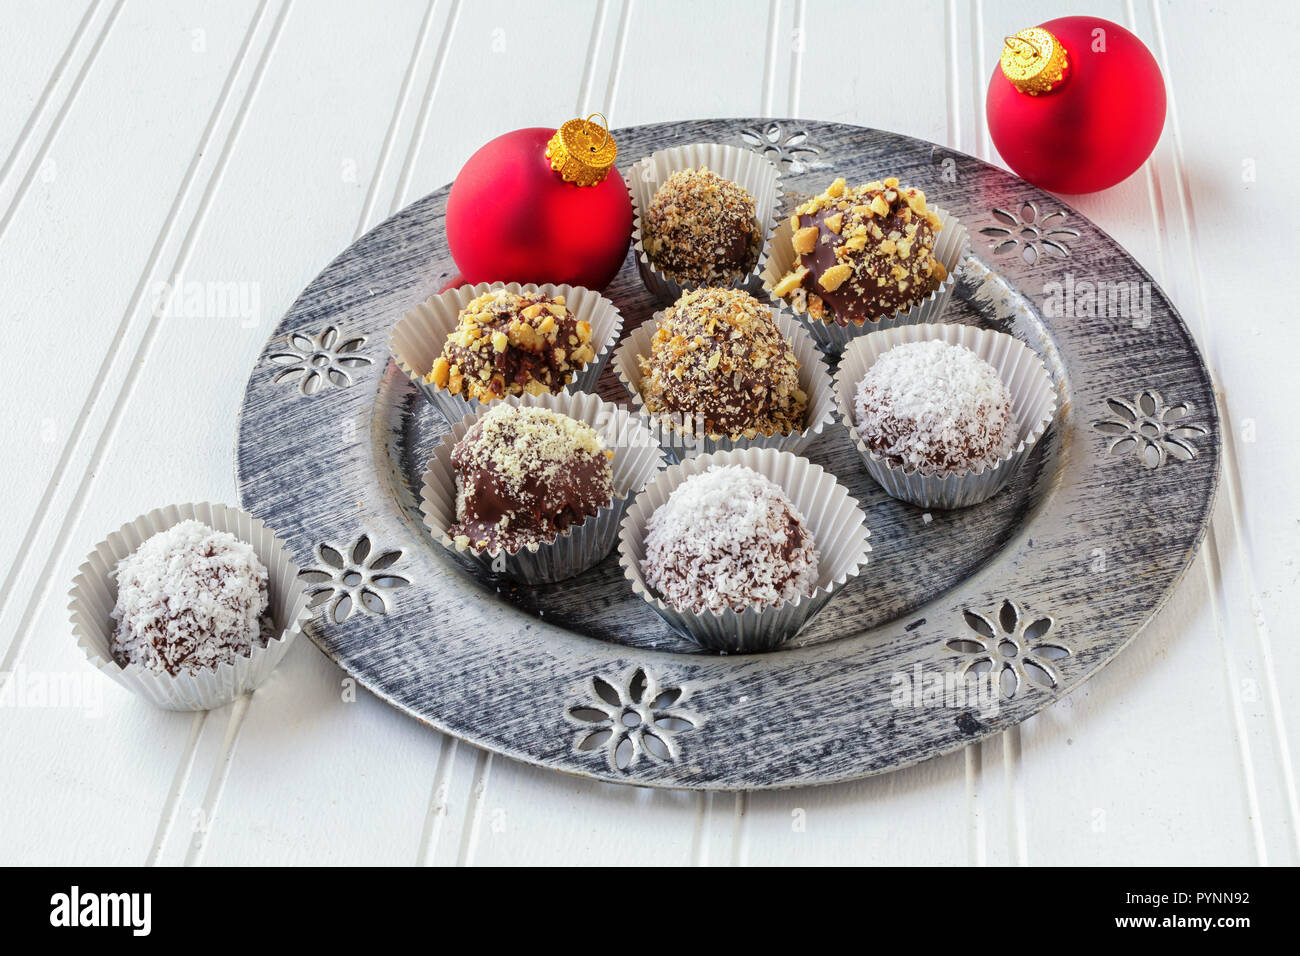 Homemade chocolate truffles each in its own foil cup. A Christmas favourite. Stock Photo